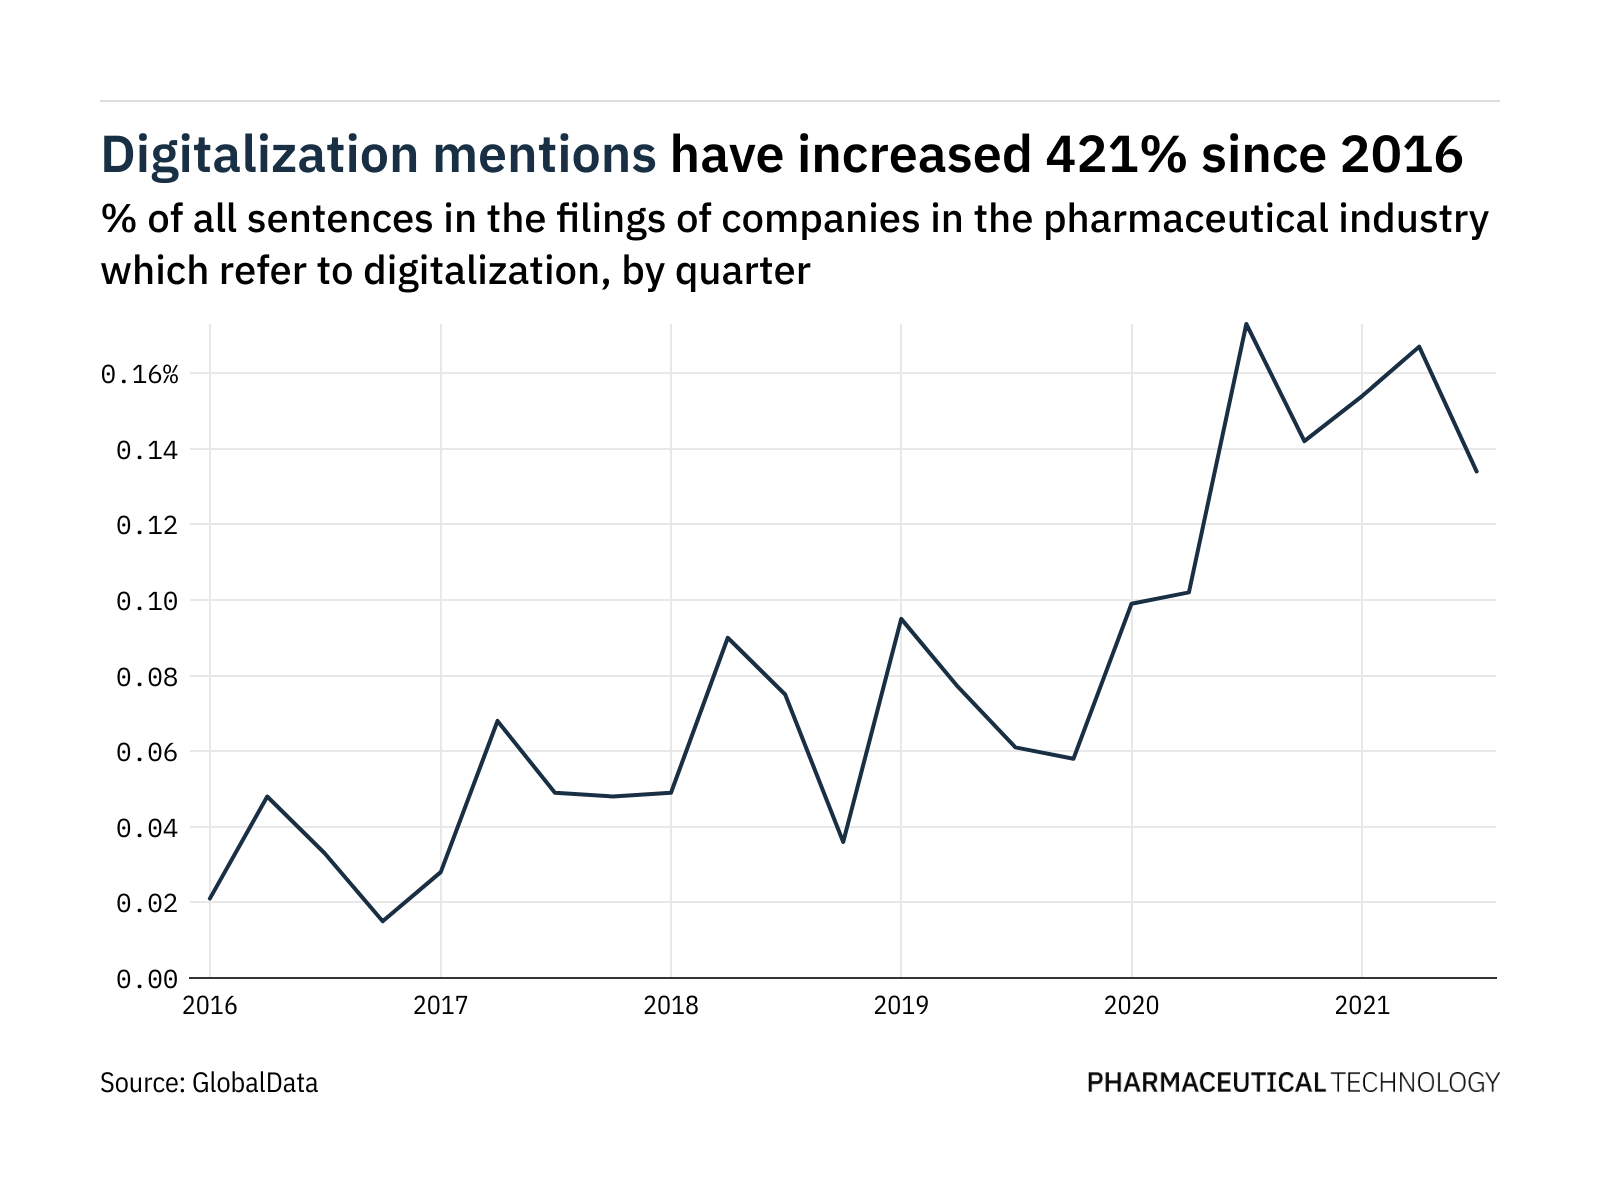 Filings buzz in pharmaceuticals: 3Q21 sees a 20% decrease in digitalization mentions